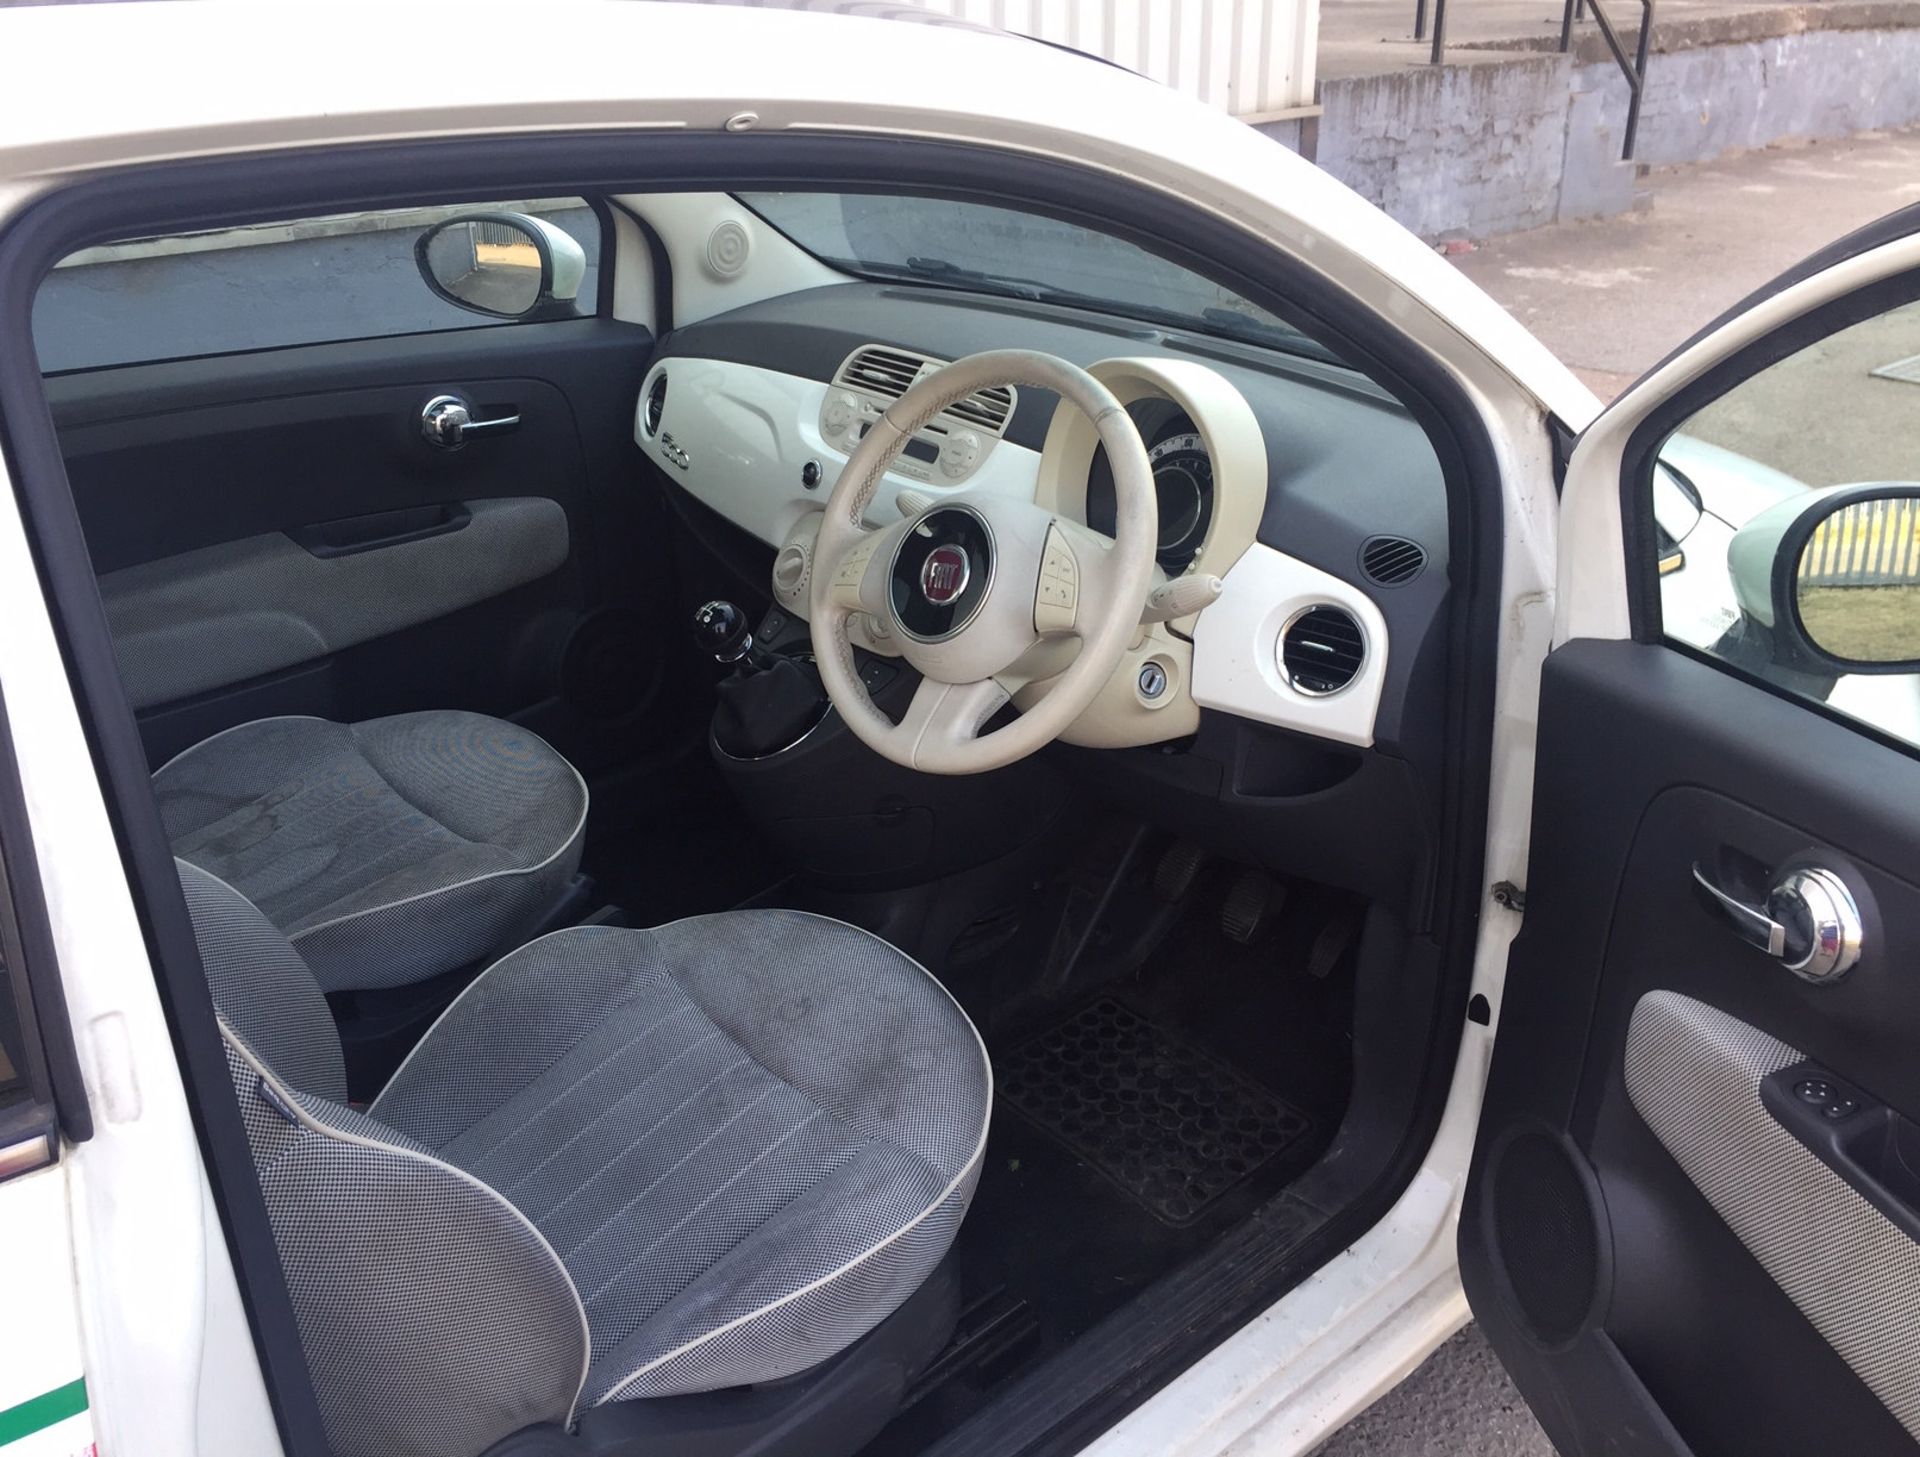 2009 Fiat 500 1.2 Lounge 3 Dr Hatchback - CL505 - NO VAT ON THE HAMMER - Location: Corby, Northampto - Image 4 of 12